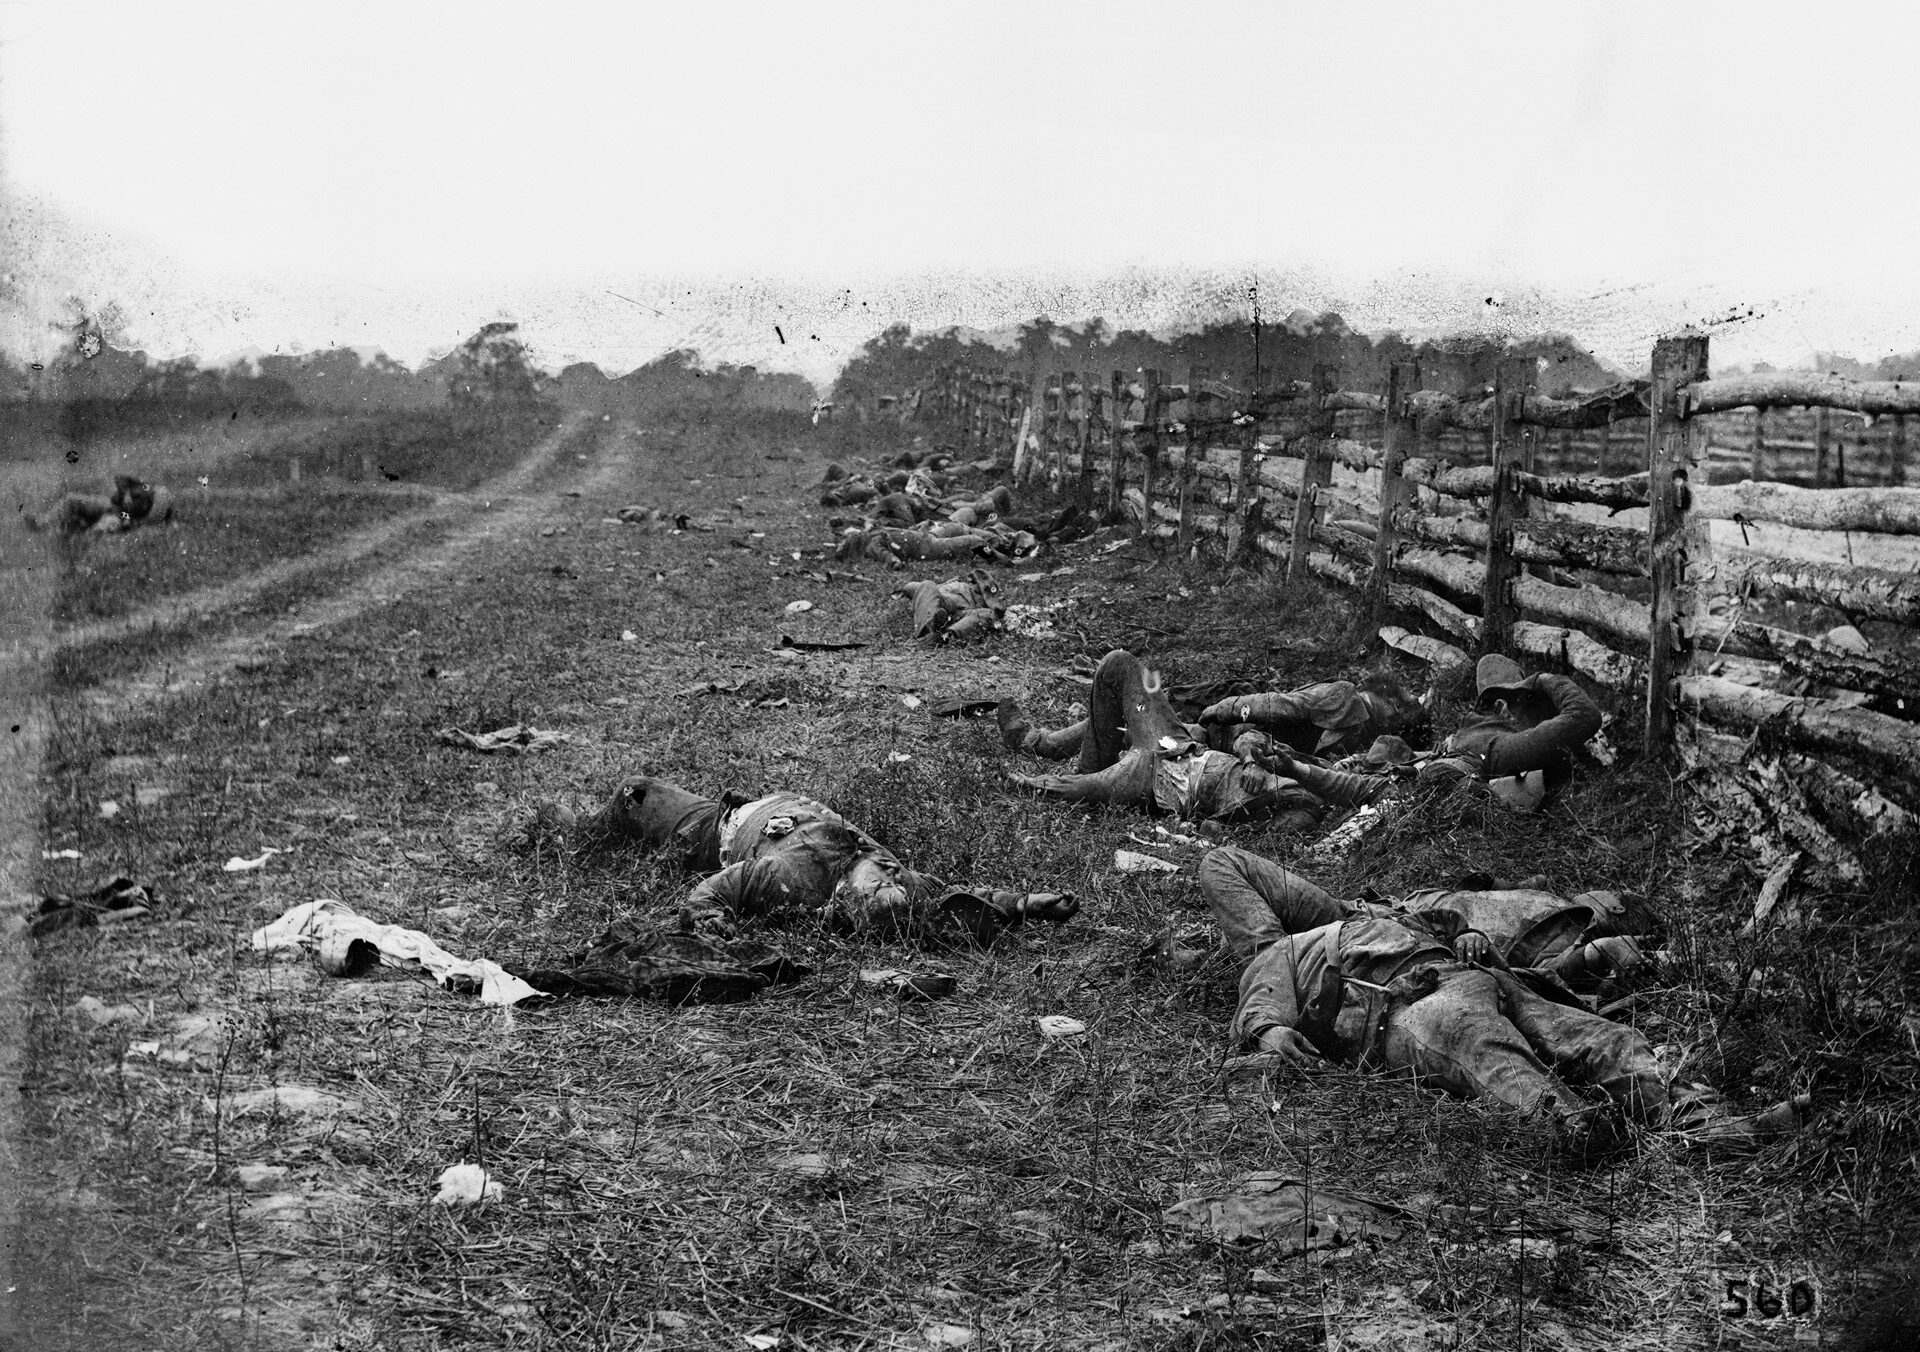 Dead Confederate soldiers from Louisiana lay fallen alongside Hagerstown Turnpike after the Battle of Antietam. This was one of the photos that shocked the nation when displayed in Brady’s New York City studio.